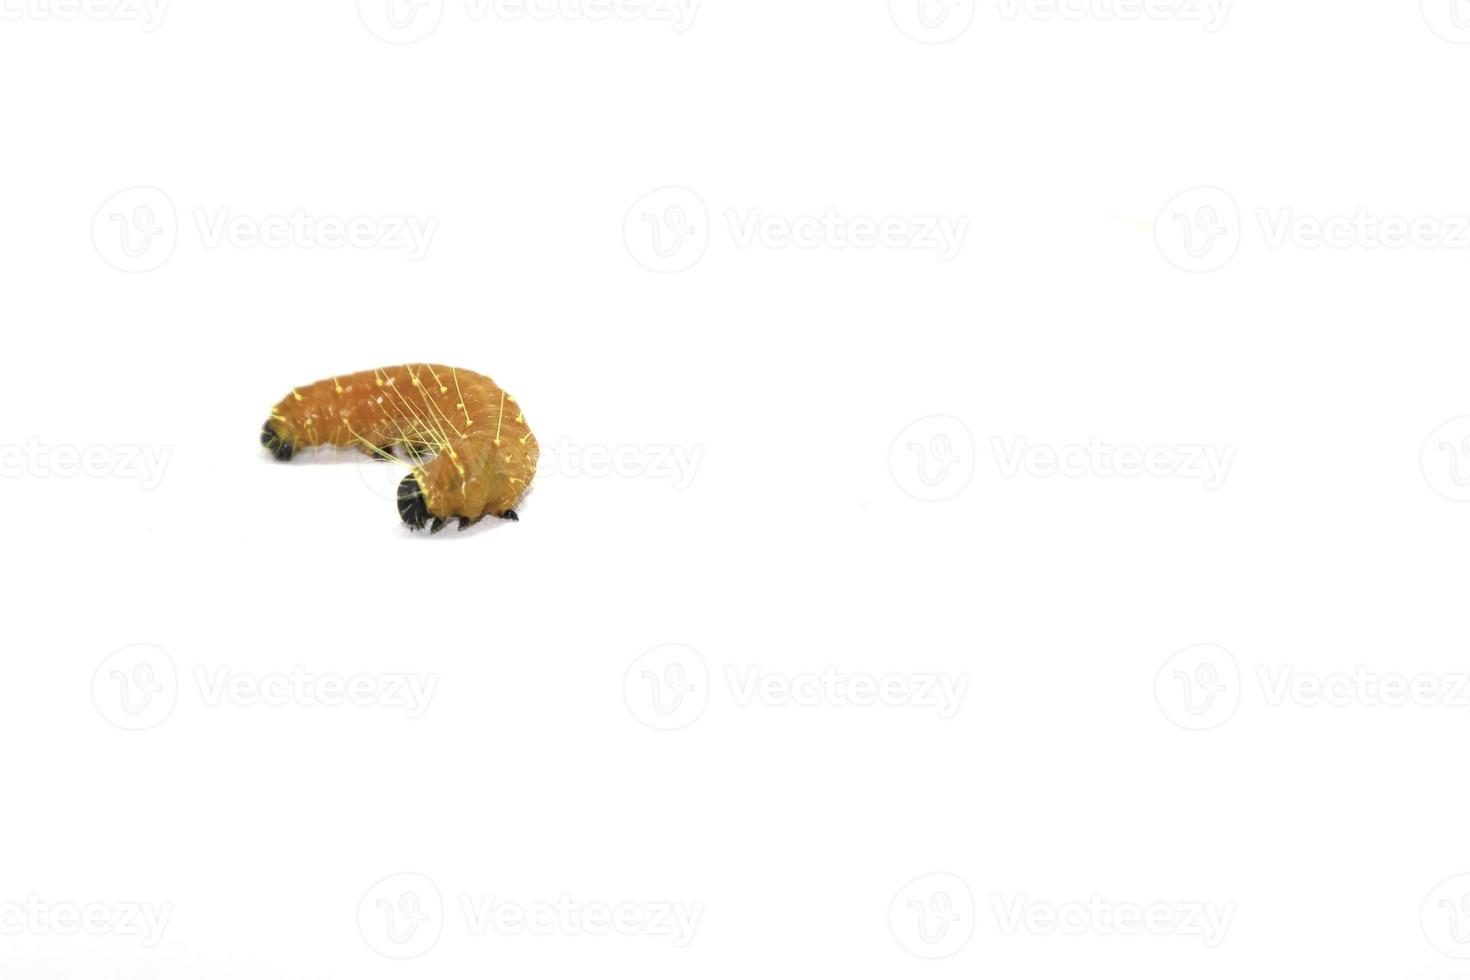 large yellow caterpillar is growing ready to be a beautiful butterfly on a white background, photographed at close range, showing the caterpillars in detail with an external flash for clarity. photo